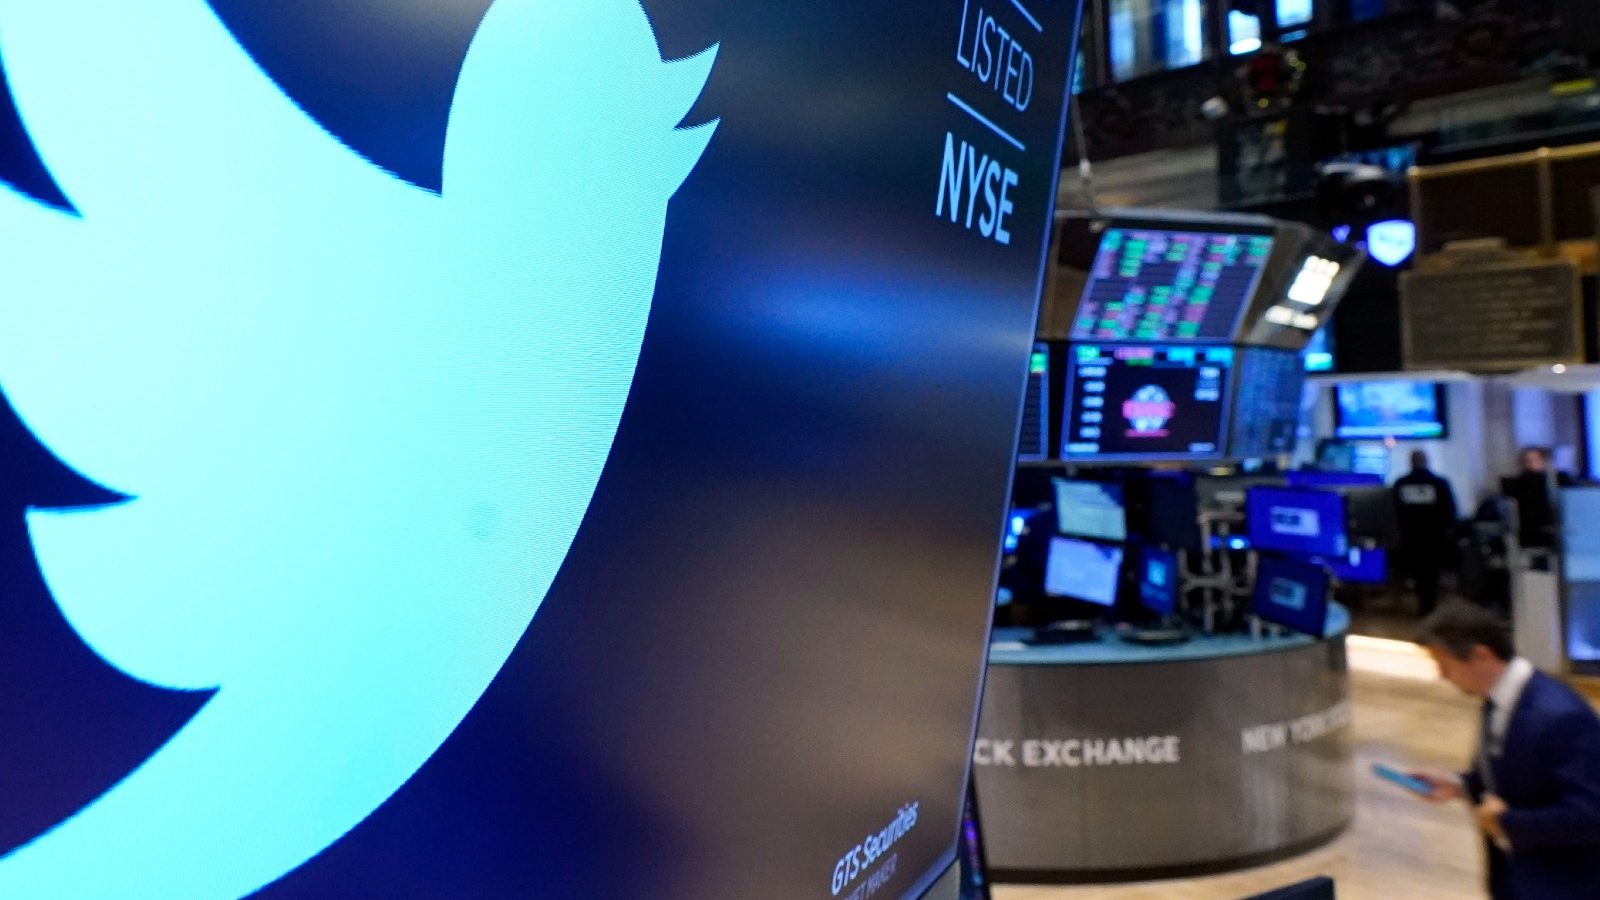 Twitter Says It Has No Plans For Company-Wide Layoffs